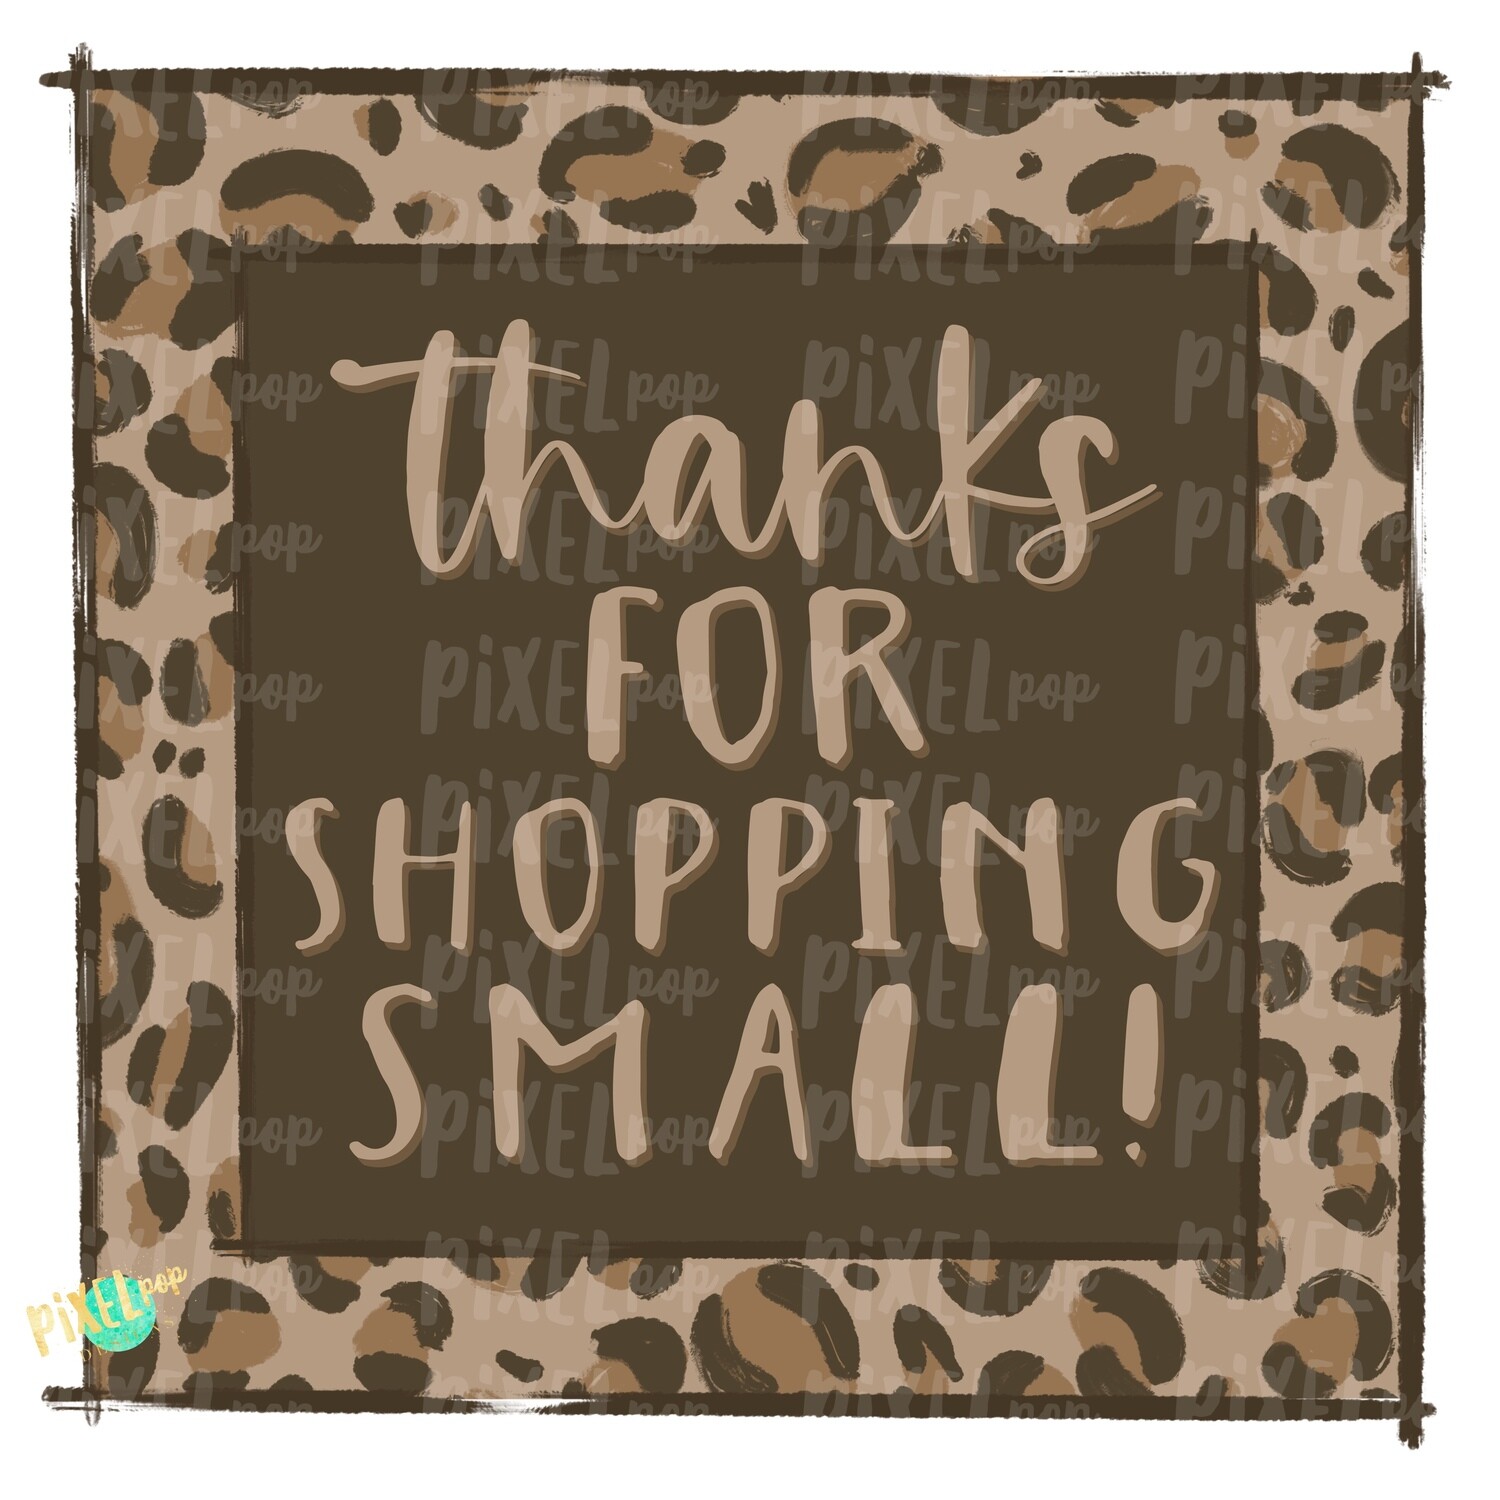 Thank You for Shopping Small Square Leopard PNG | Business Clip | Small Business Marketing Image | Small Business Sticker Art | Business Art